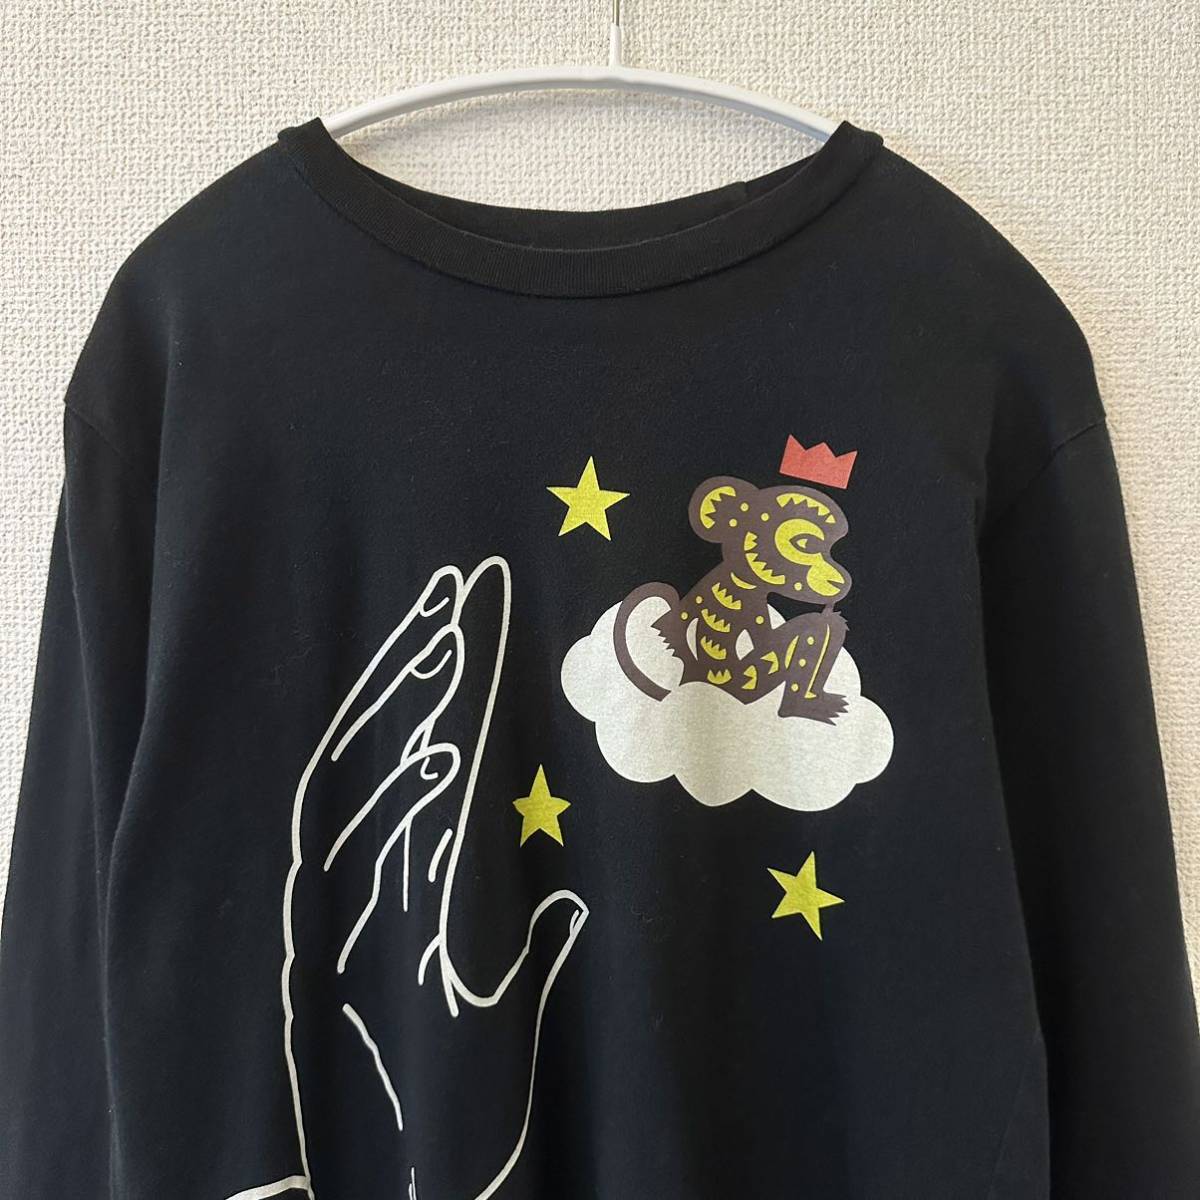 AW04 walter van beirendonck Cloudy Stars期 ロングスリーブ Tシャツ ロンT w< 2004AW_画像2